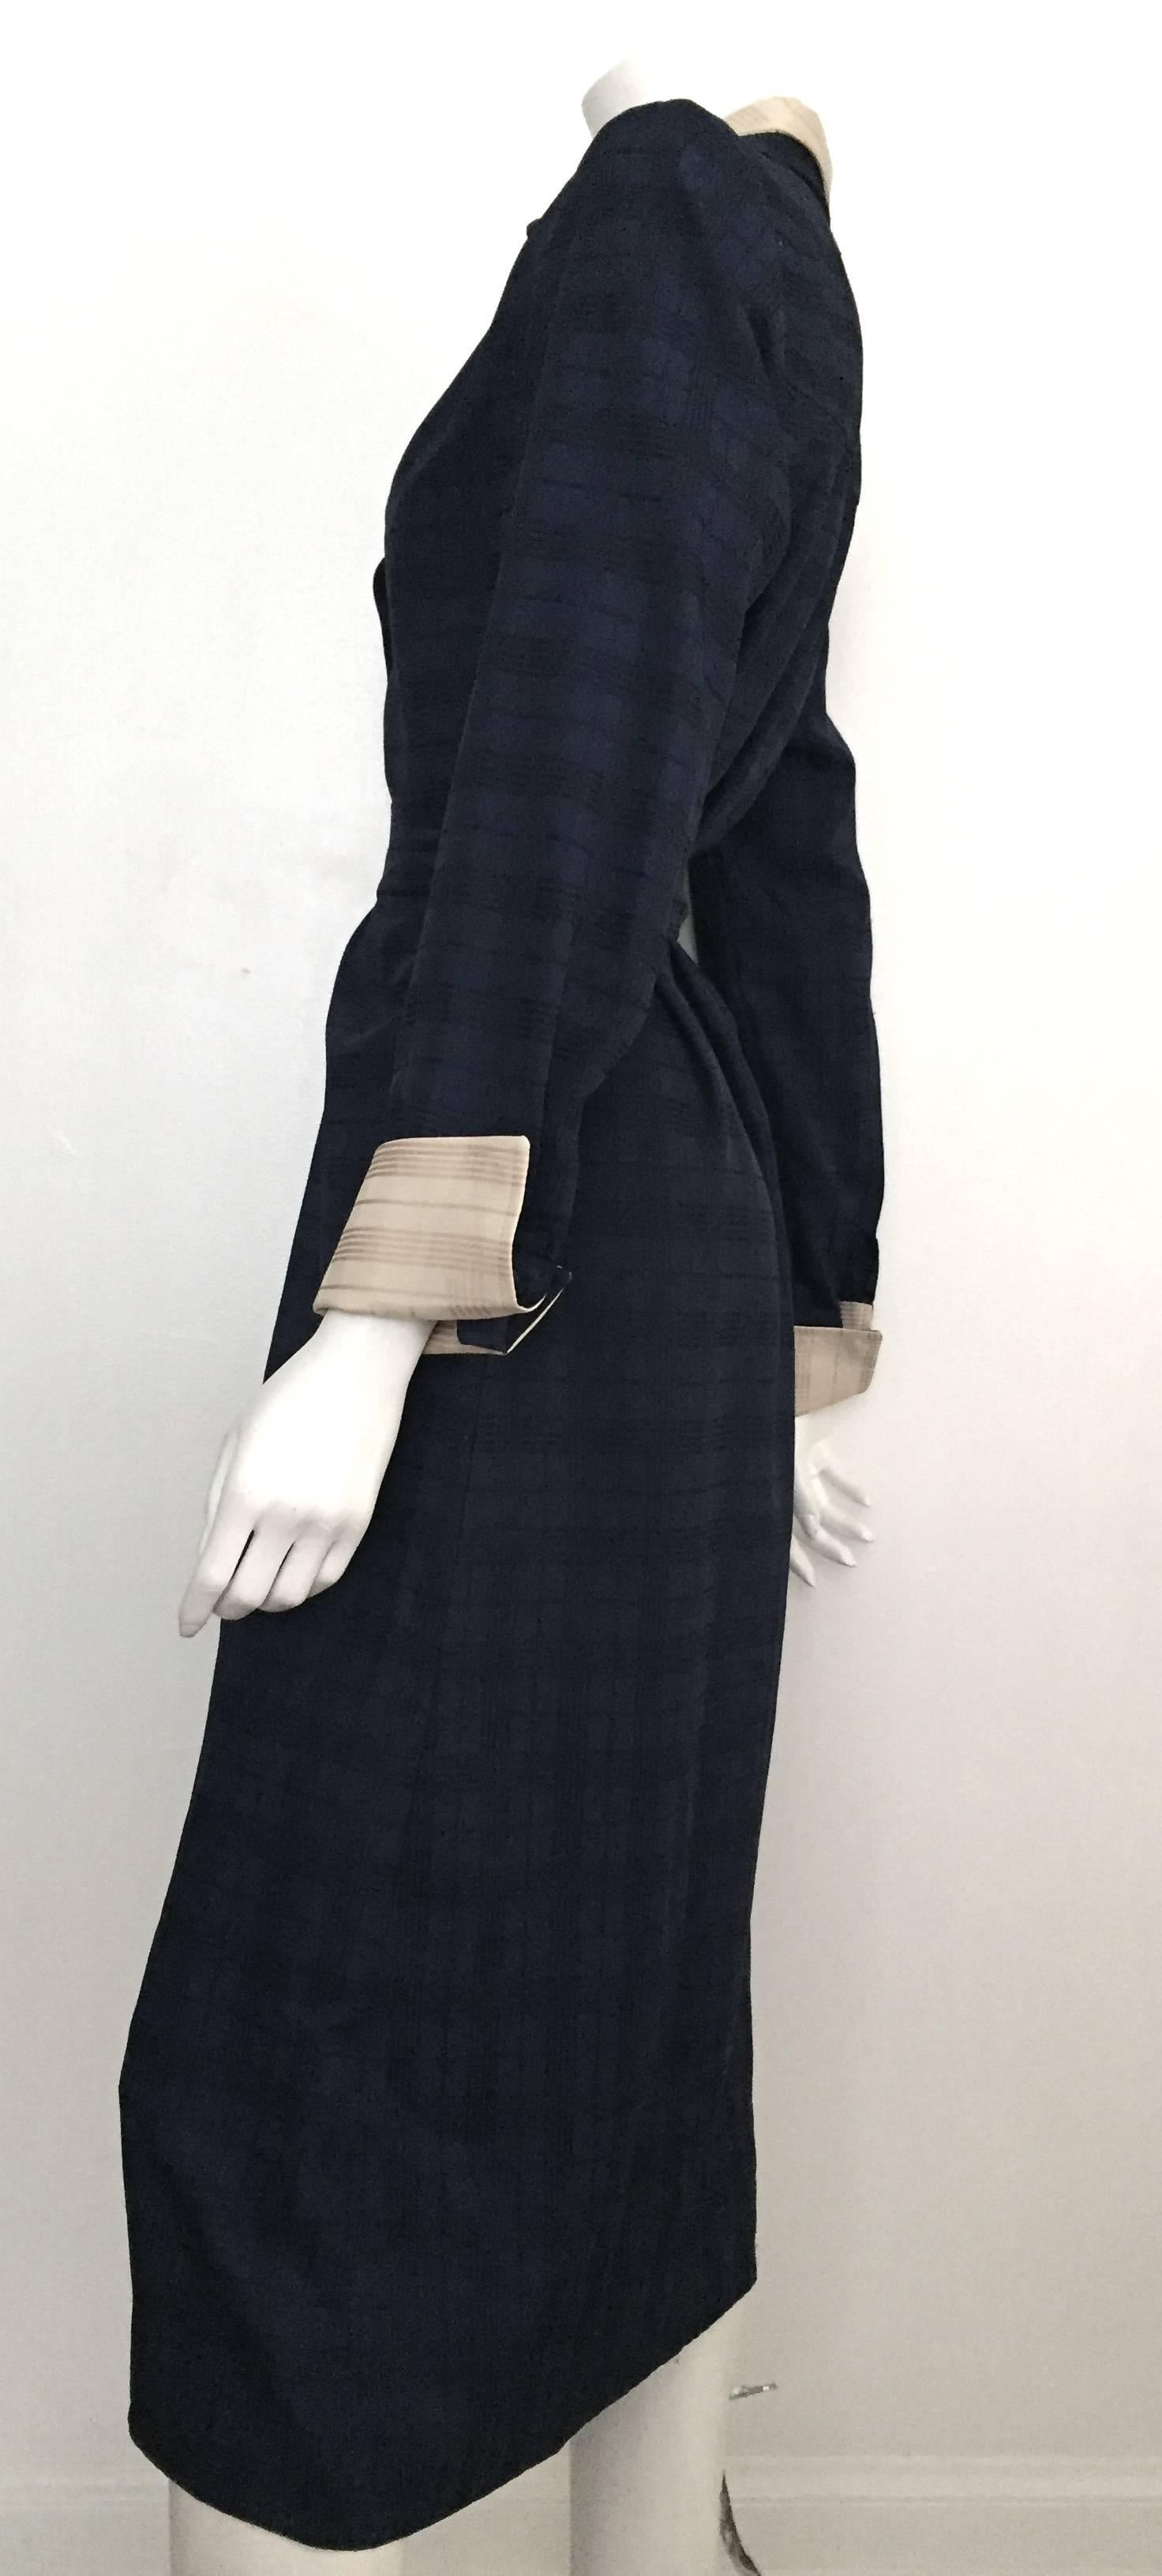 Lanvin Navy Plaid Shirt Dress Size  10 / 12, 1970s  In Good Condition For Sale In Atlanta, GA